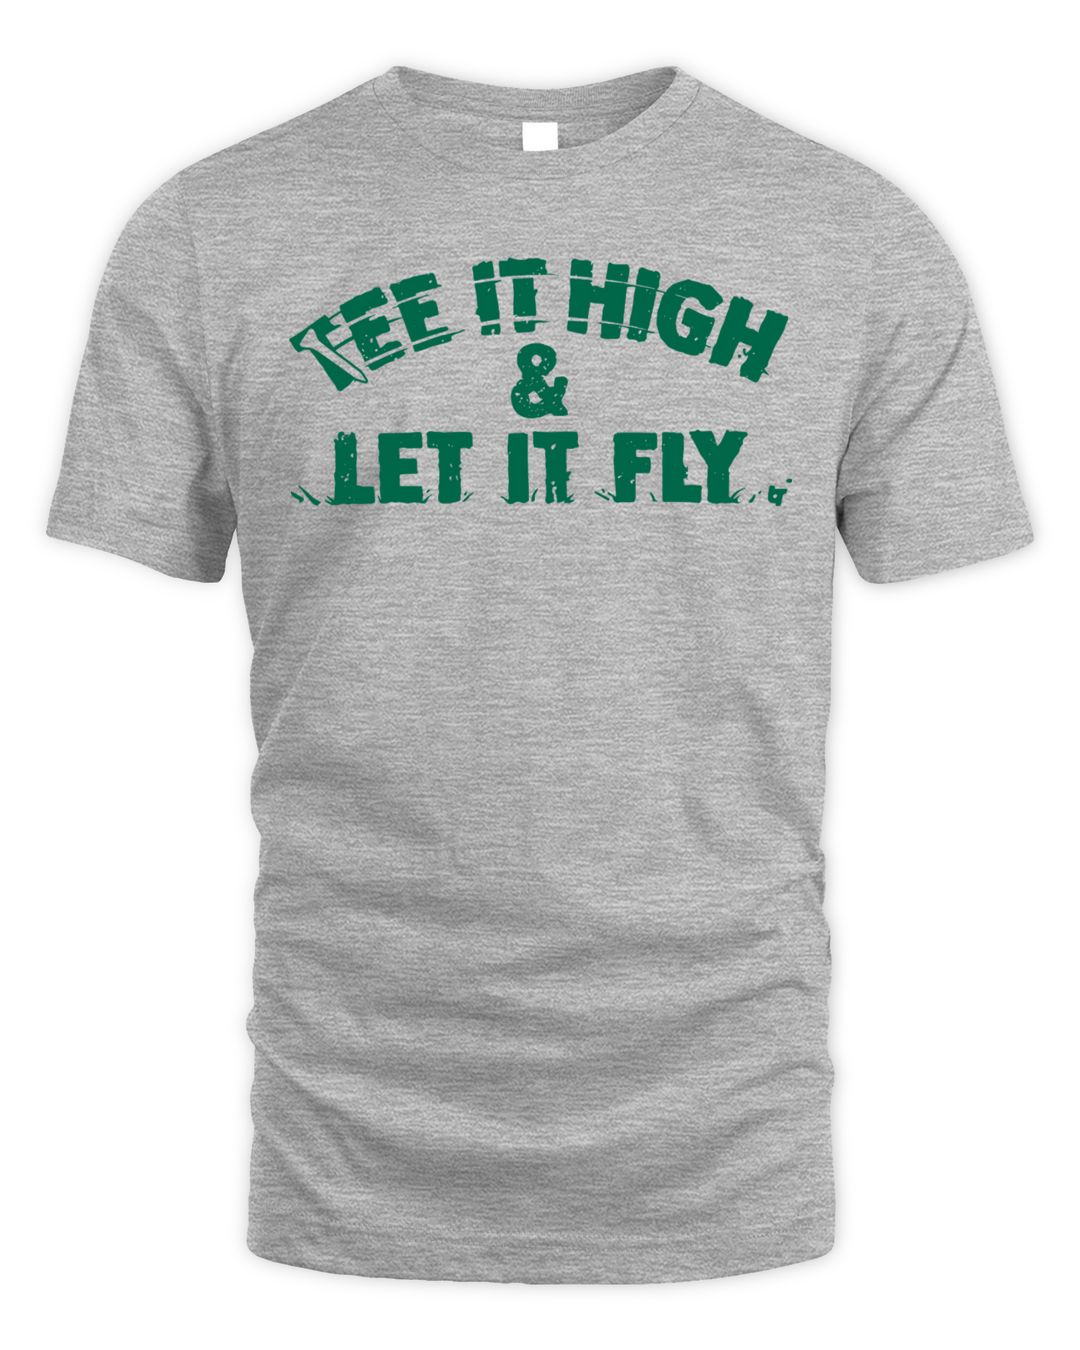 Tee It High & Let It Fly Shirt